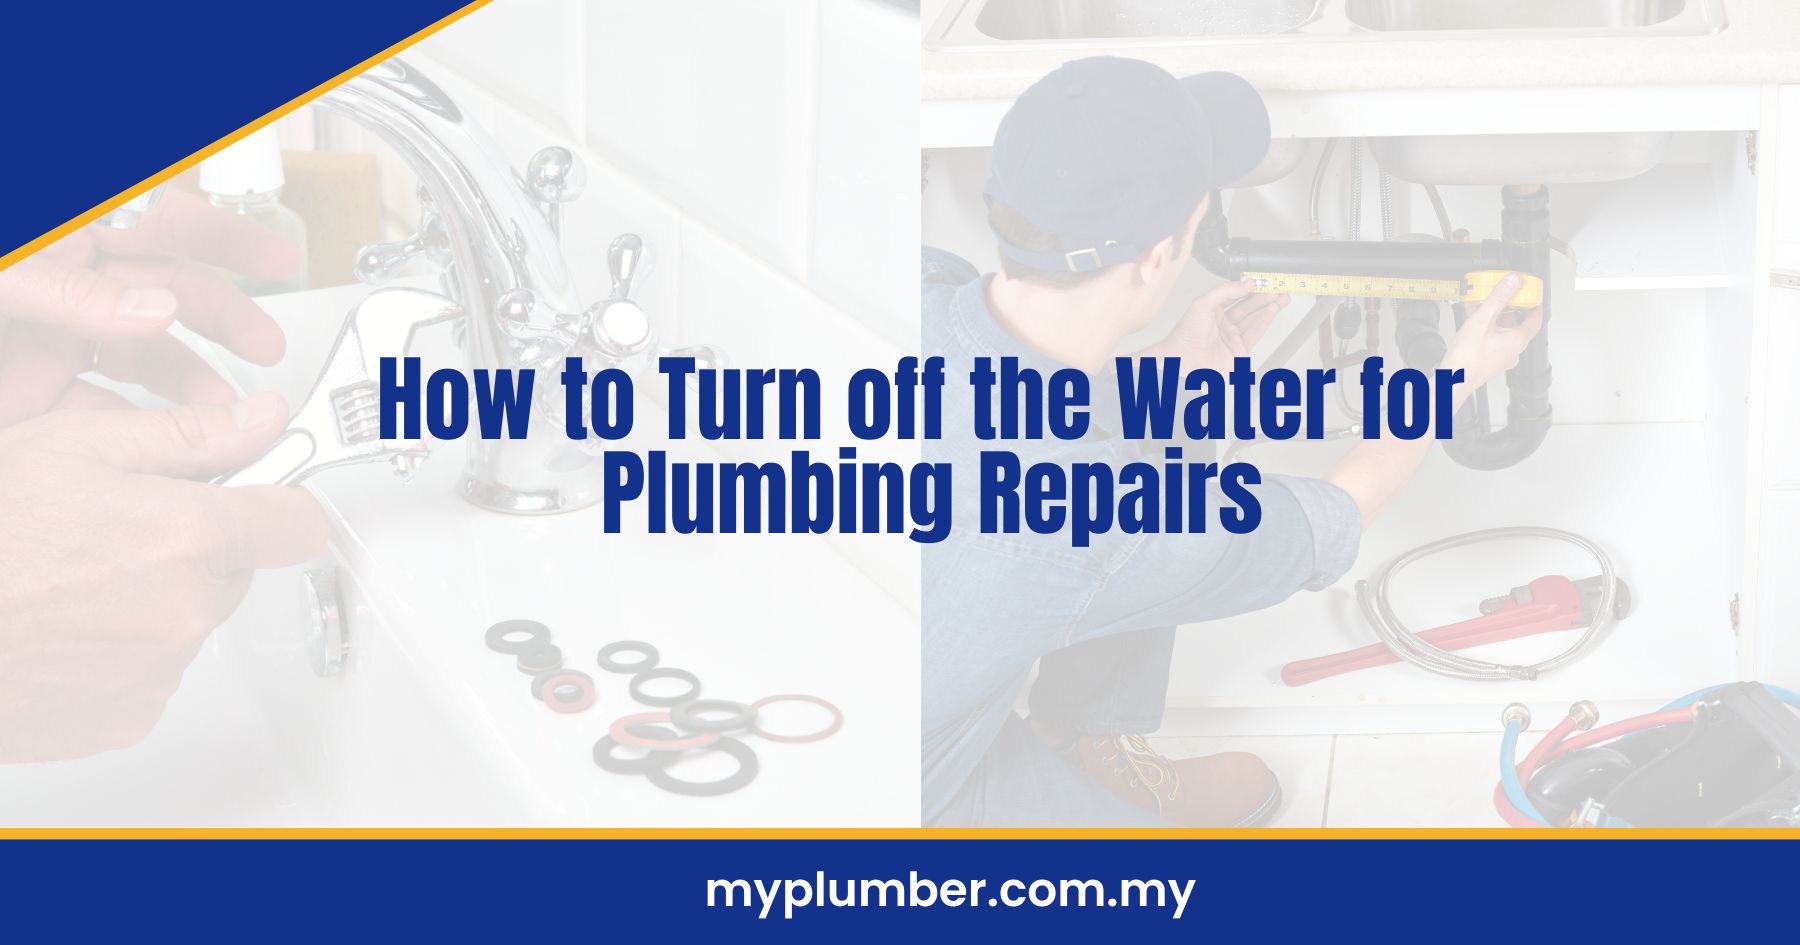 How to Turn off the Water for Plumbing Repairs